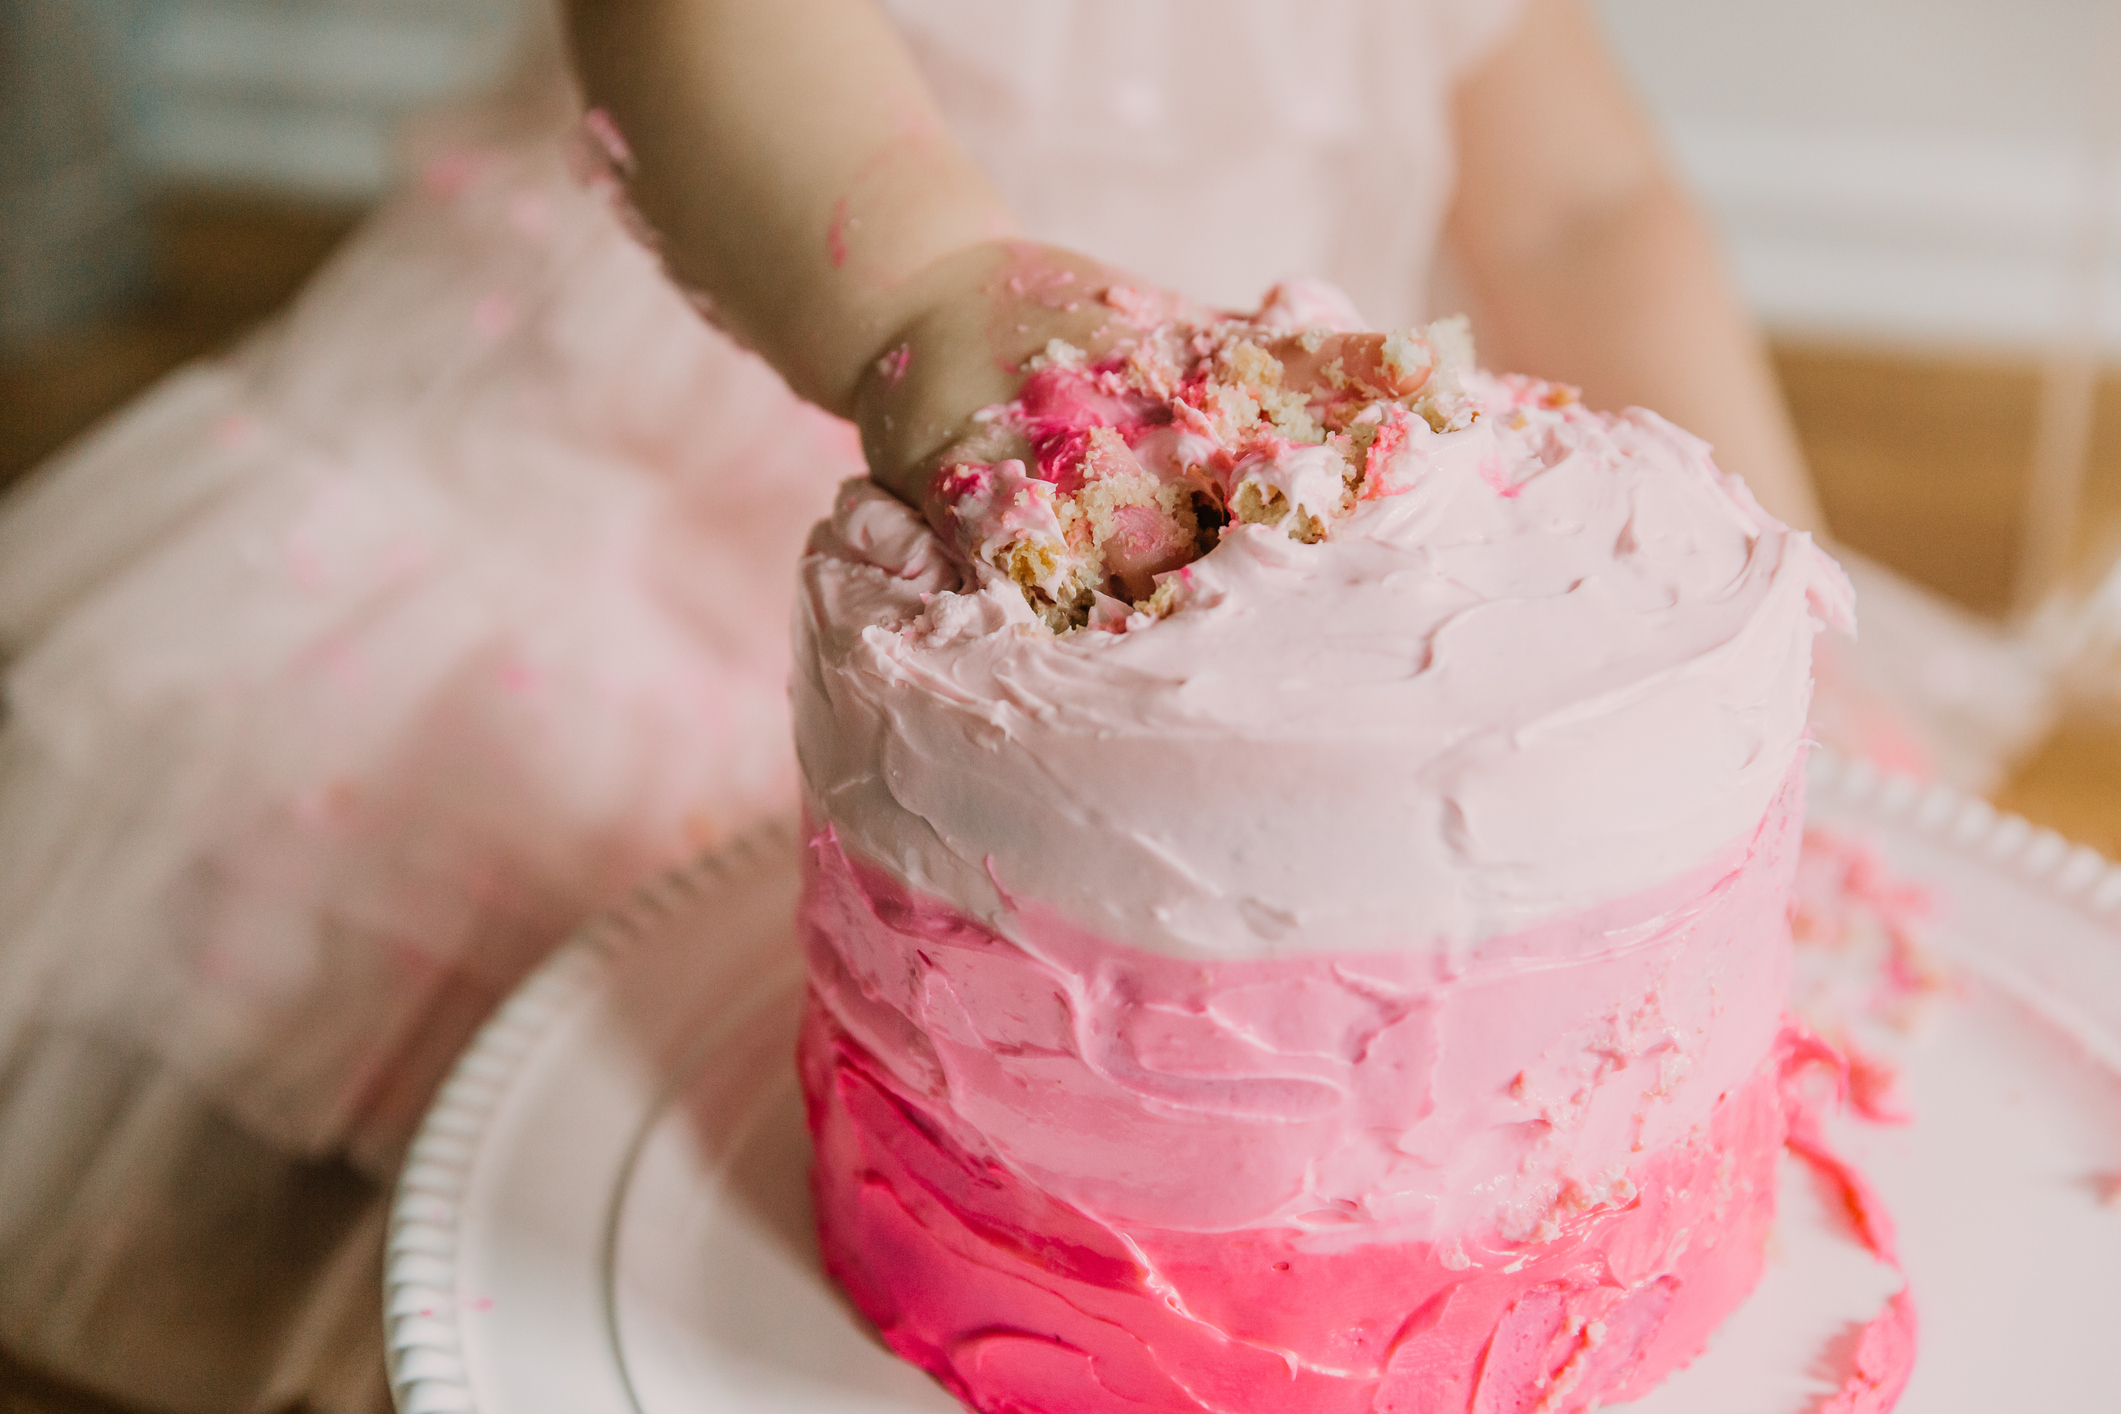 Child smashing hand into a pink frosted cake during a cake smash photo session